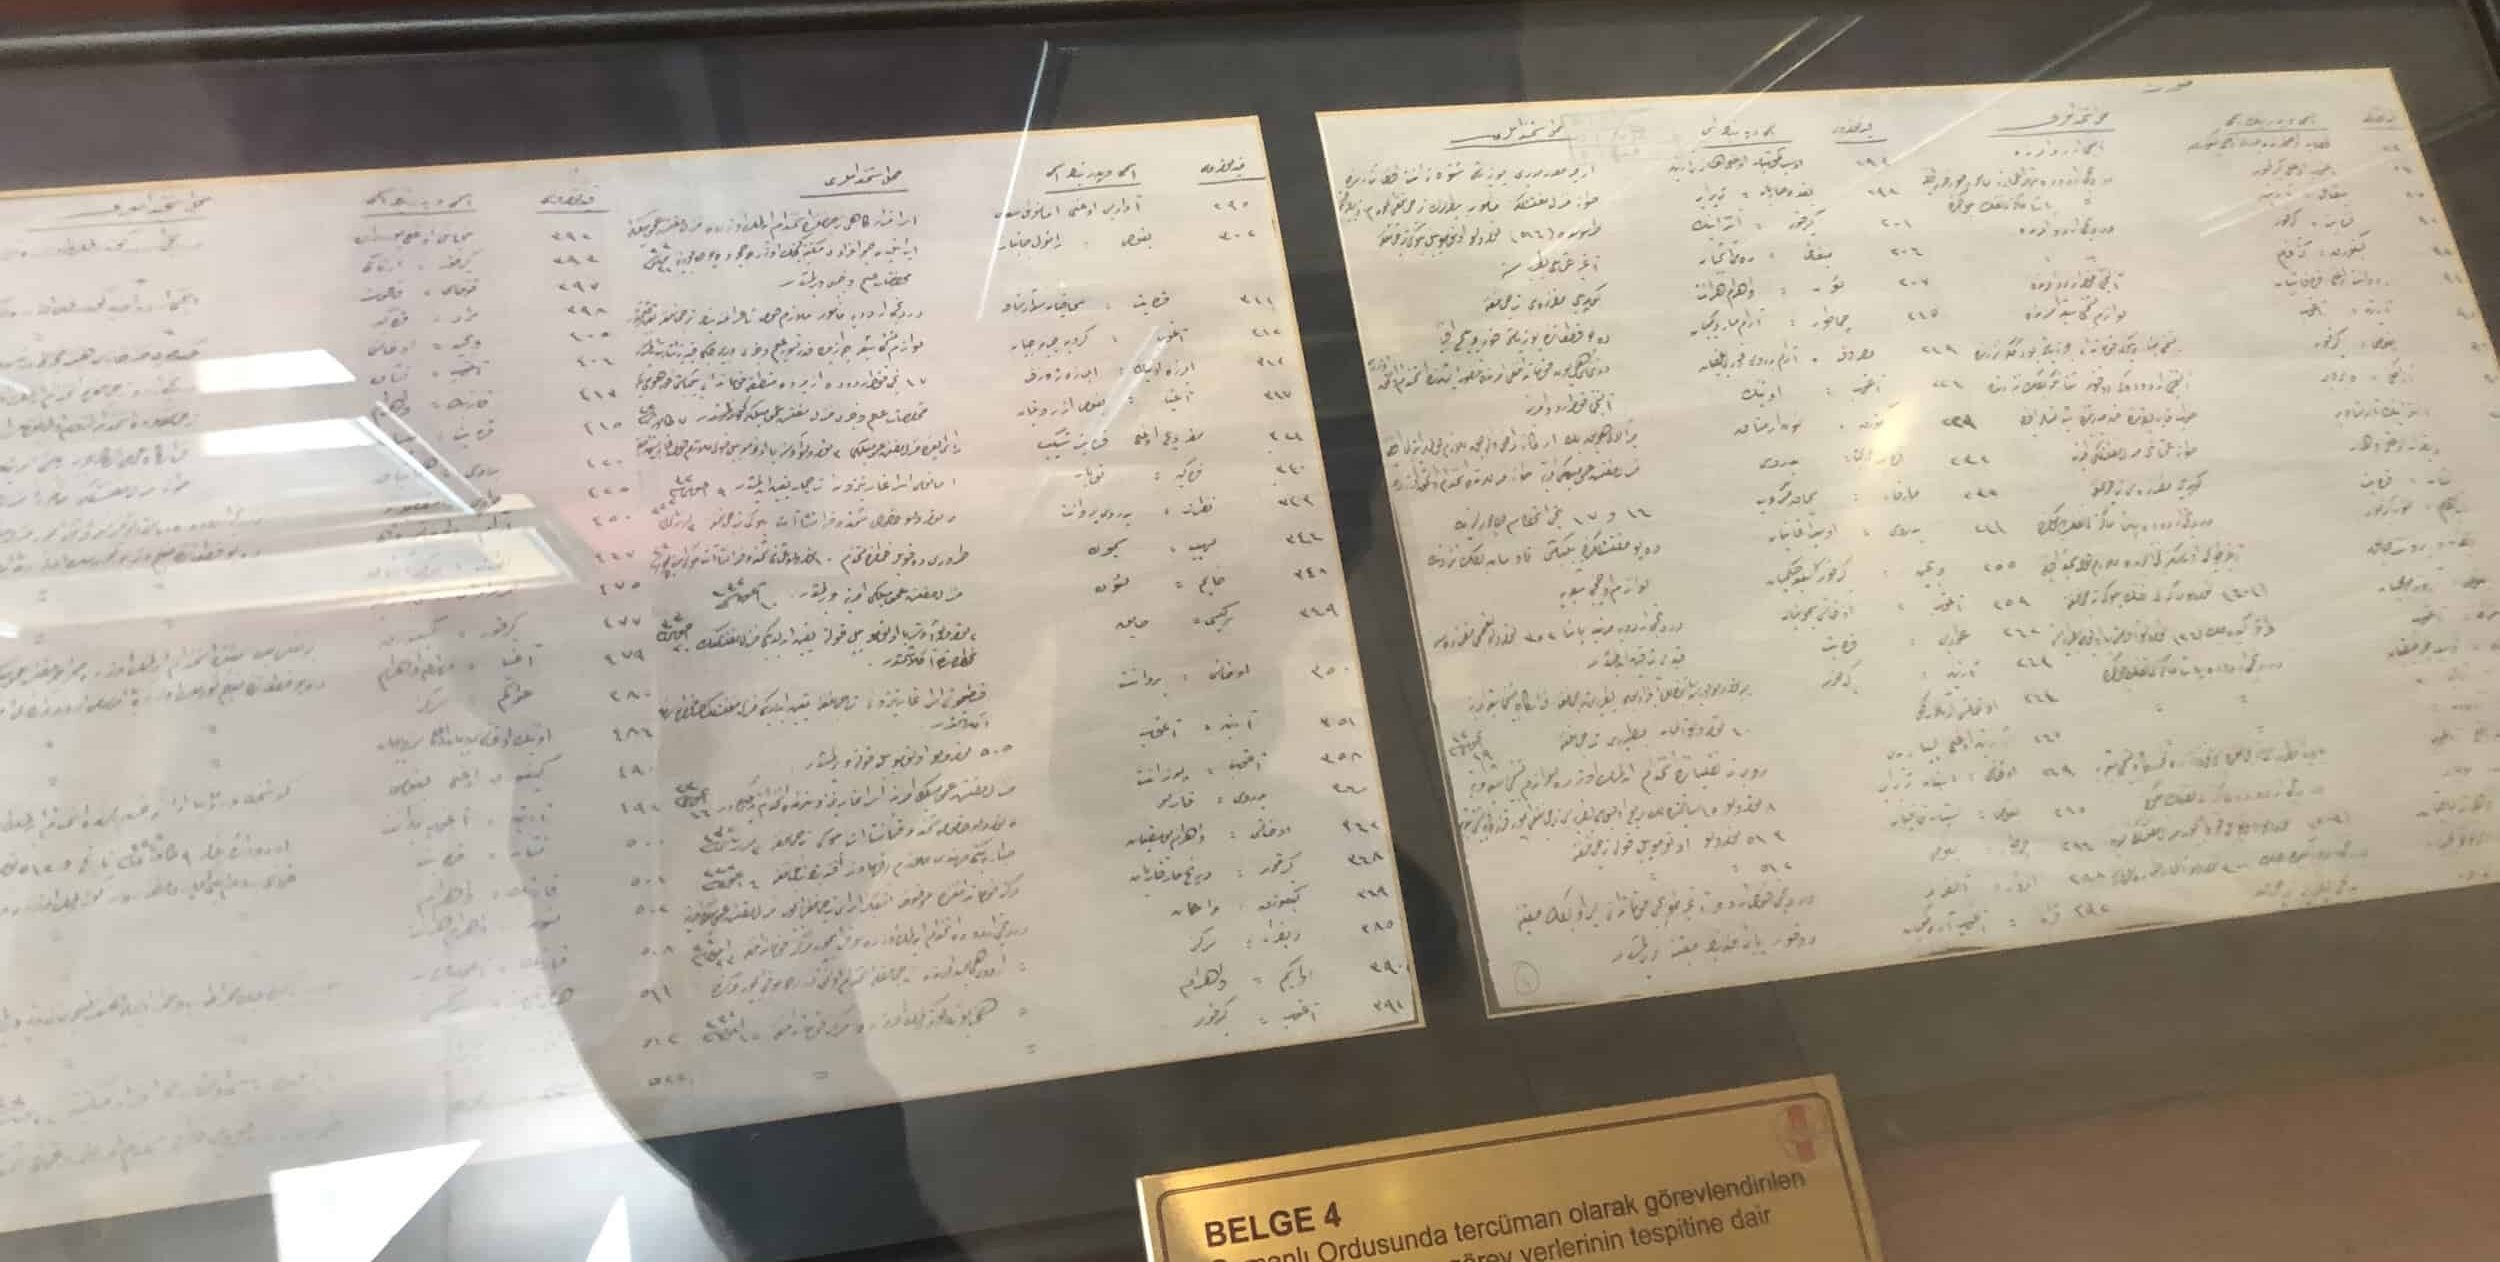 List of Armenians appointed as translators in the Ottoman Army